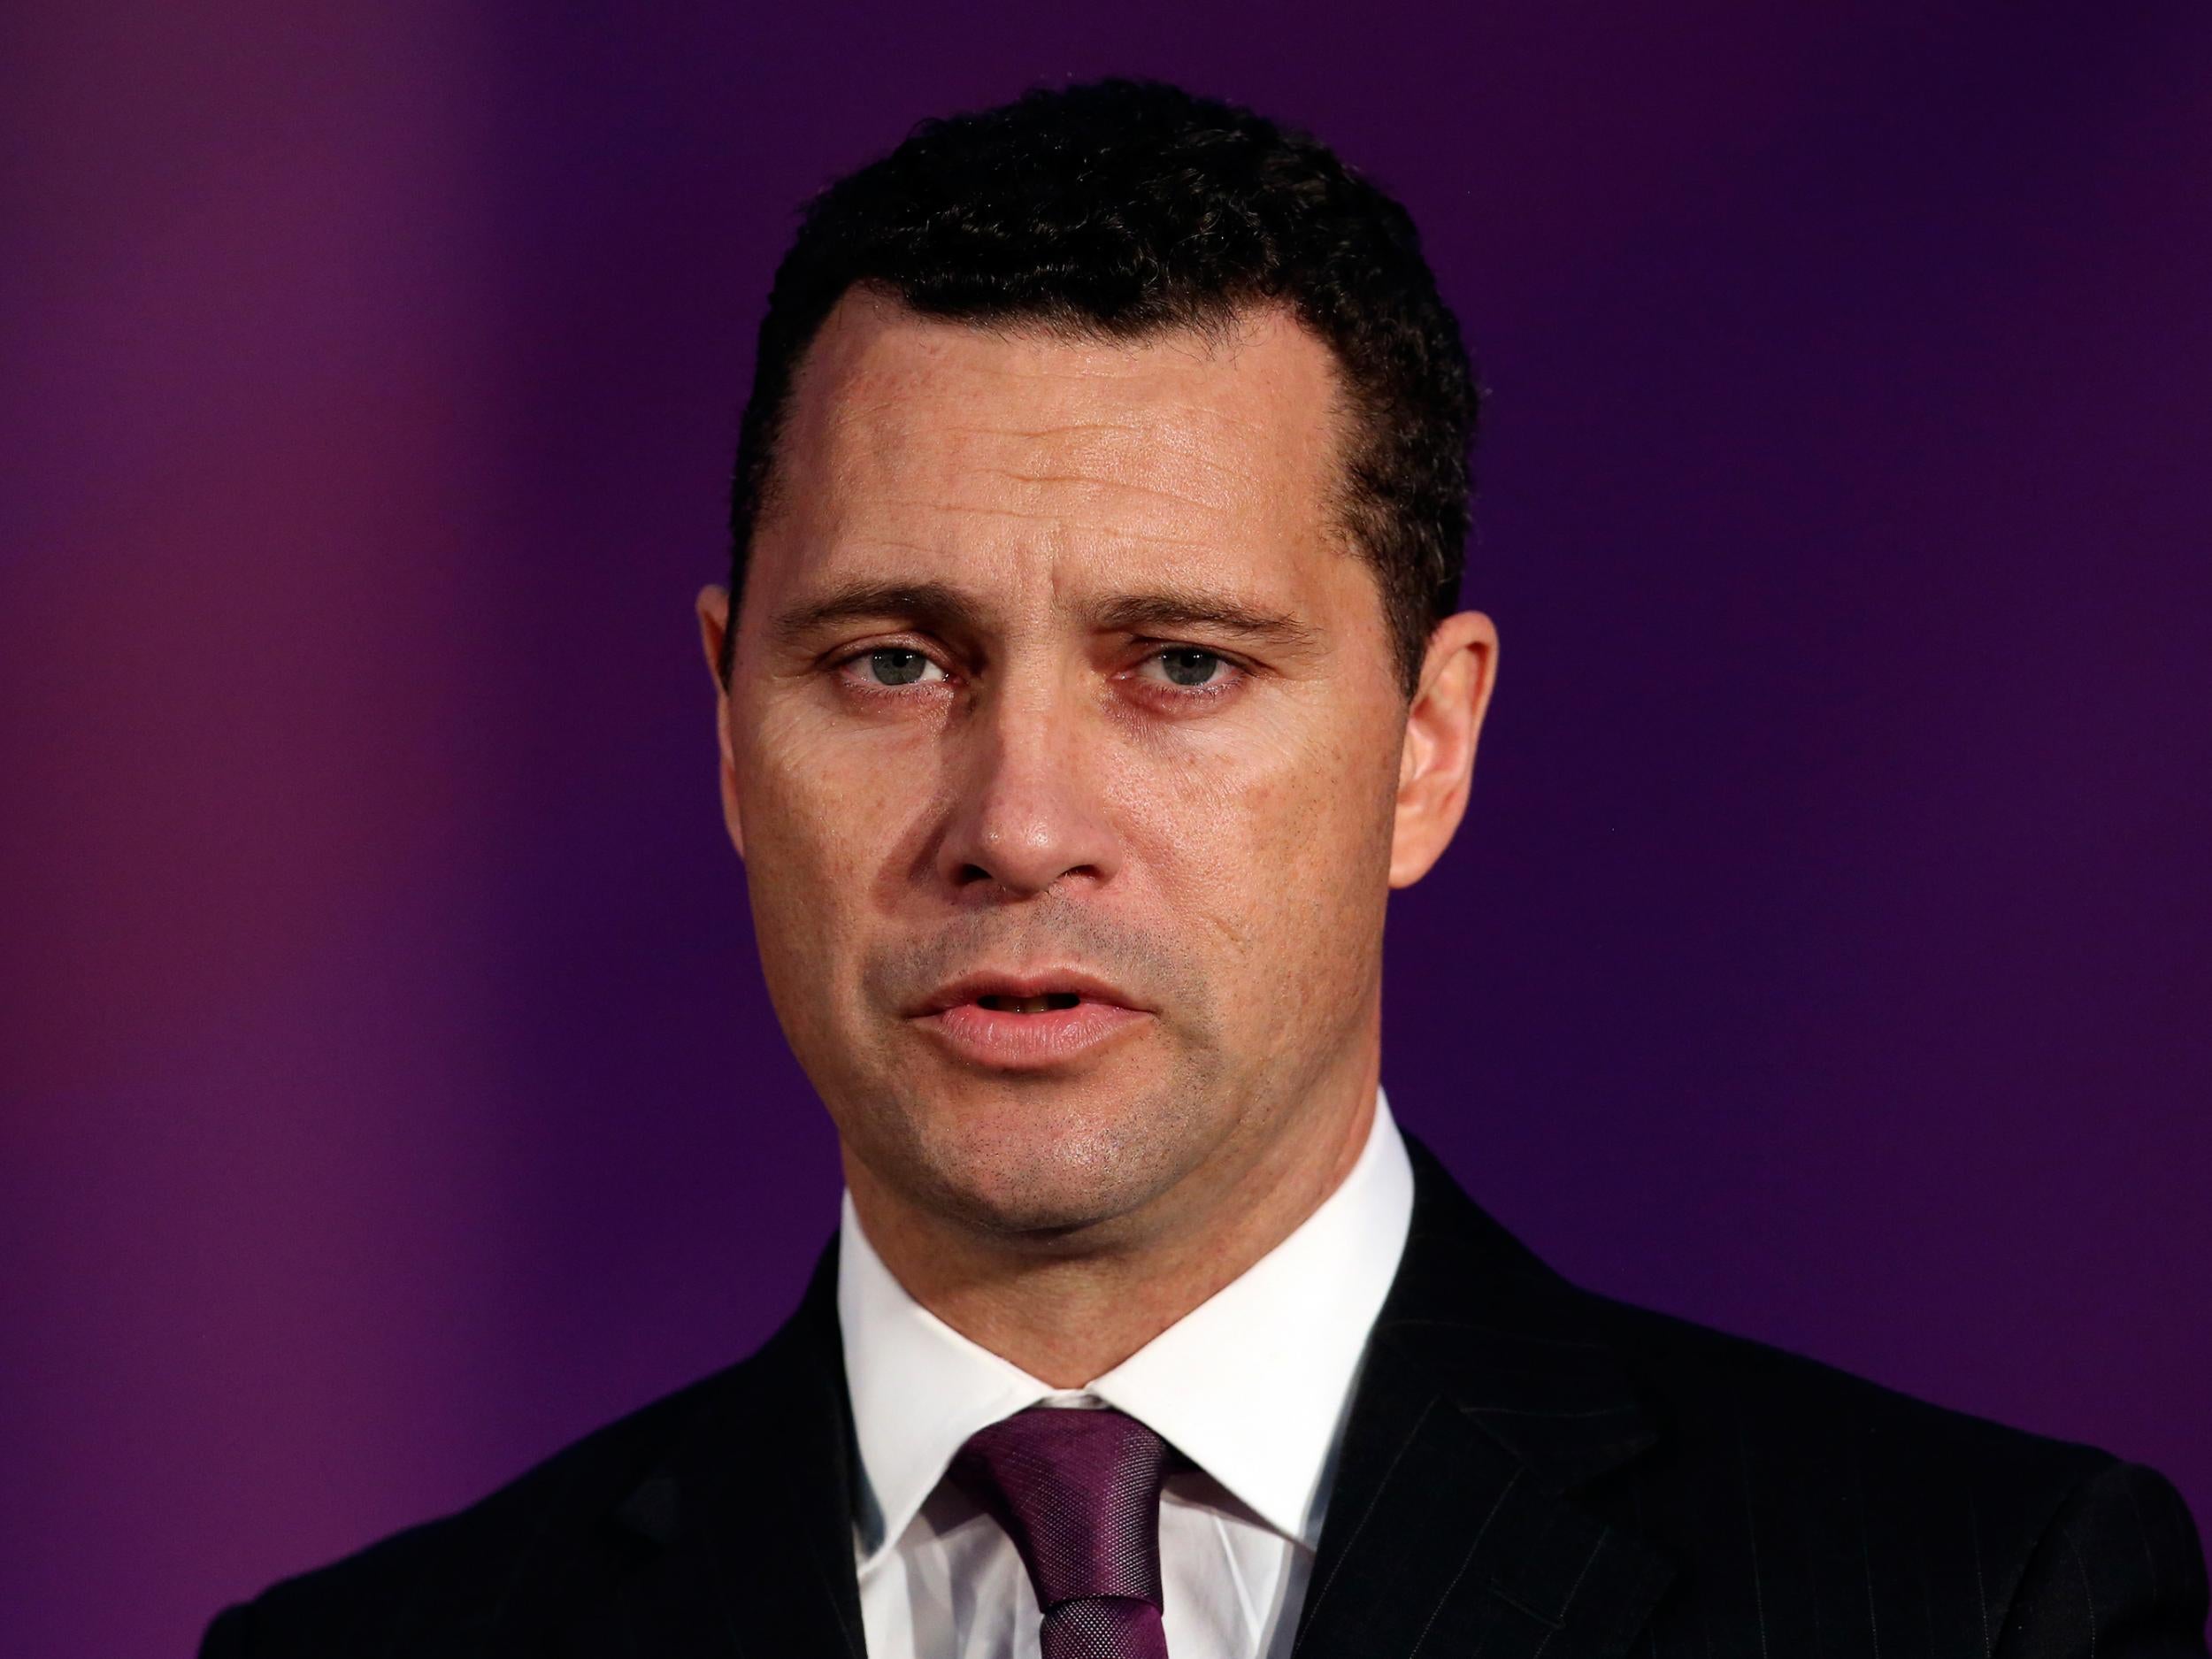 The possibility that Steven Woolfe may be prevented from standing under Ukip rules has caused panic among allies of Nigel Farage